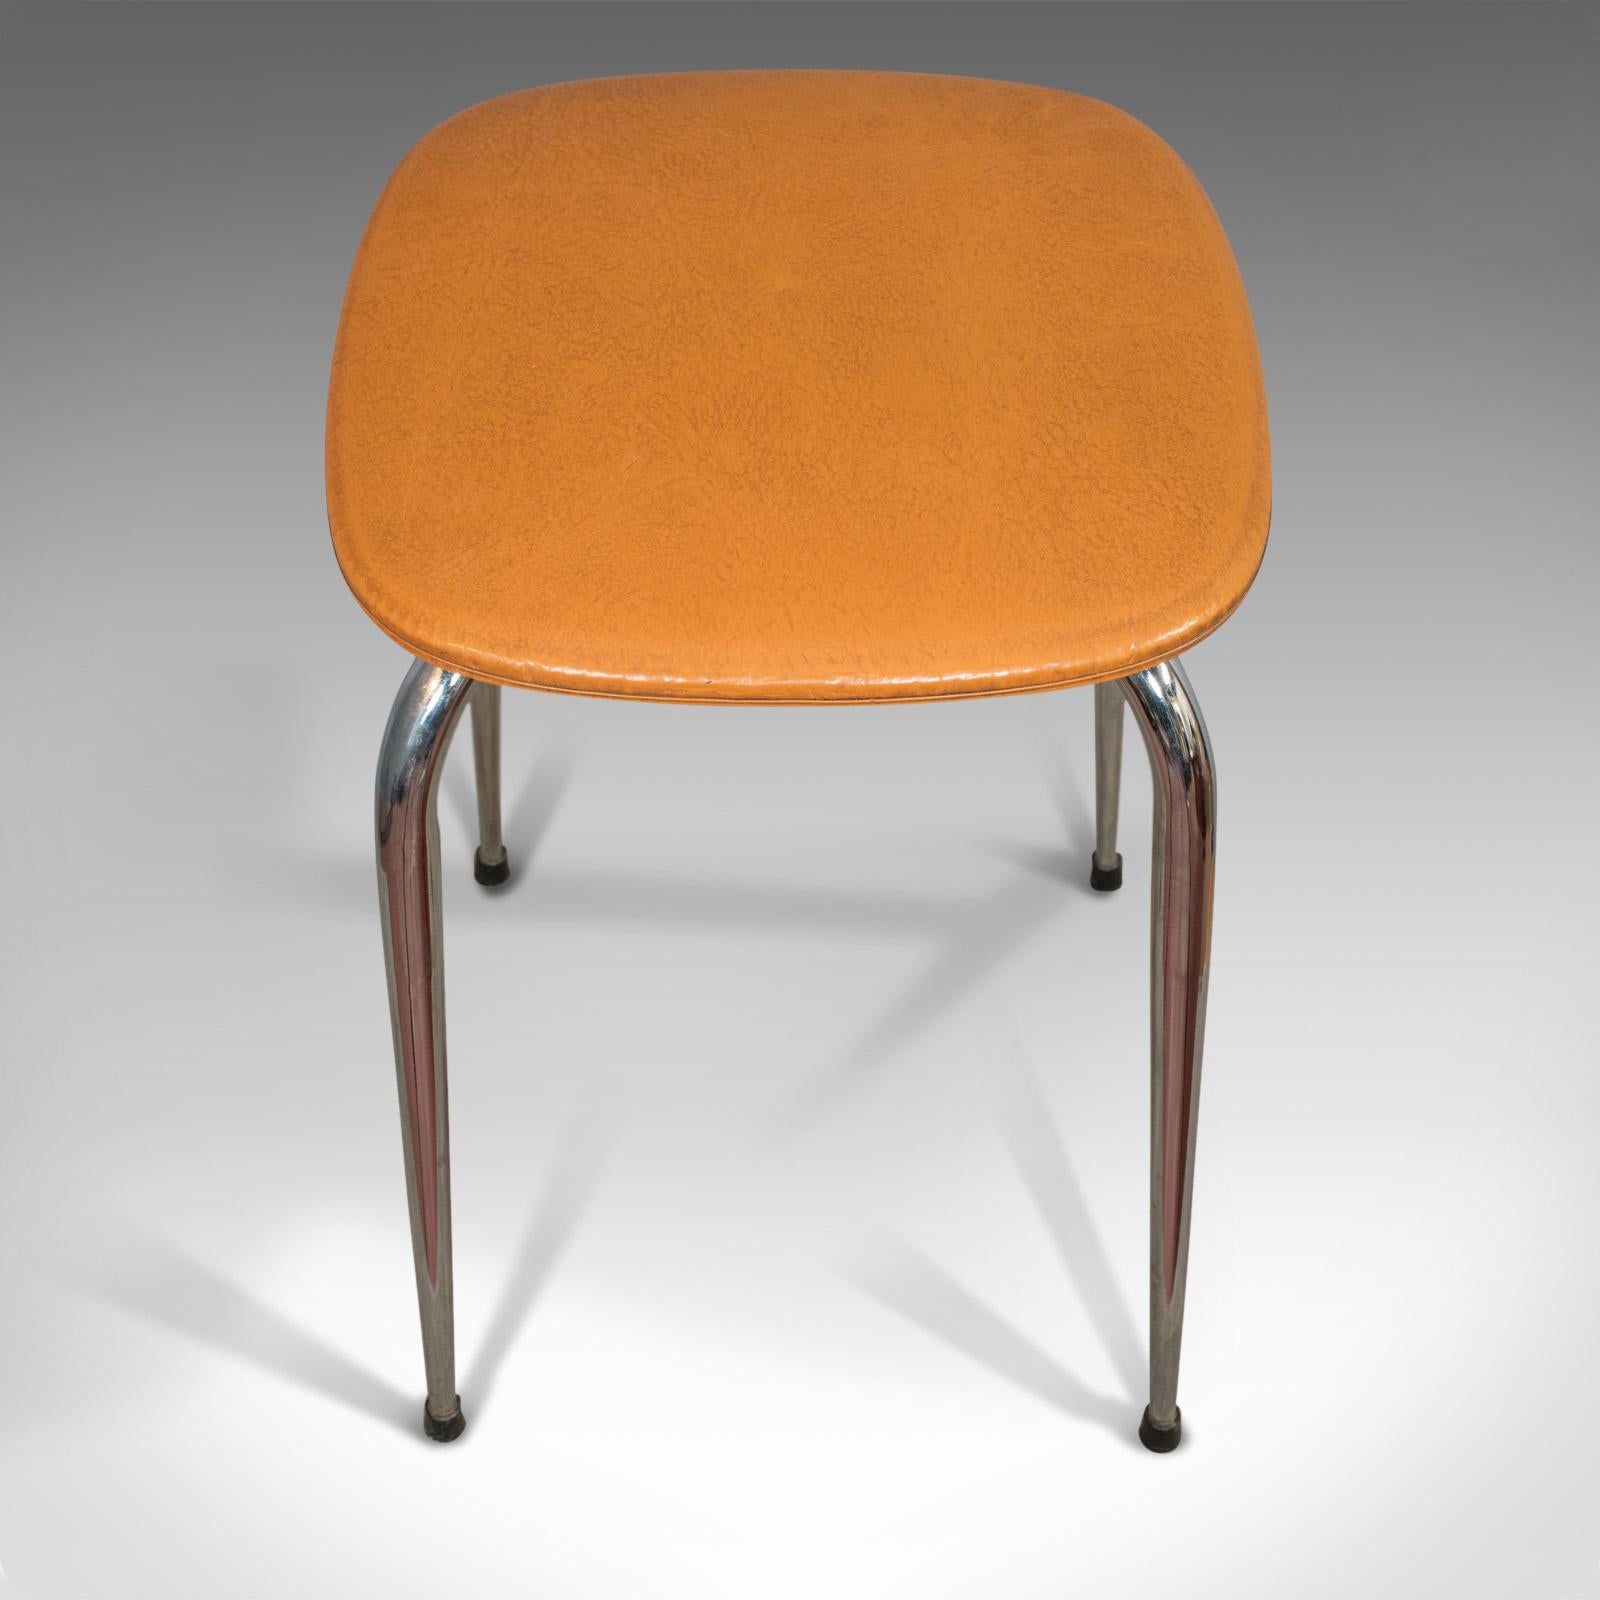 Pair of Vintage Lounge Stools, French, Leatherette, 1960s Stool, 20th Century For Sale 3